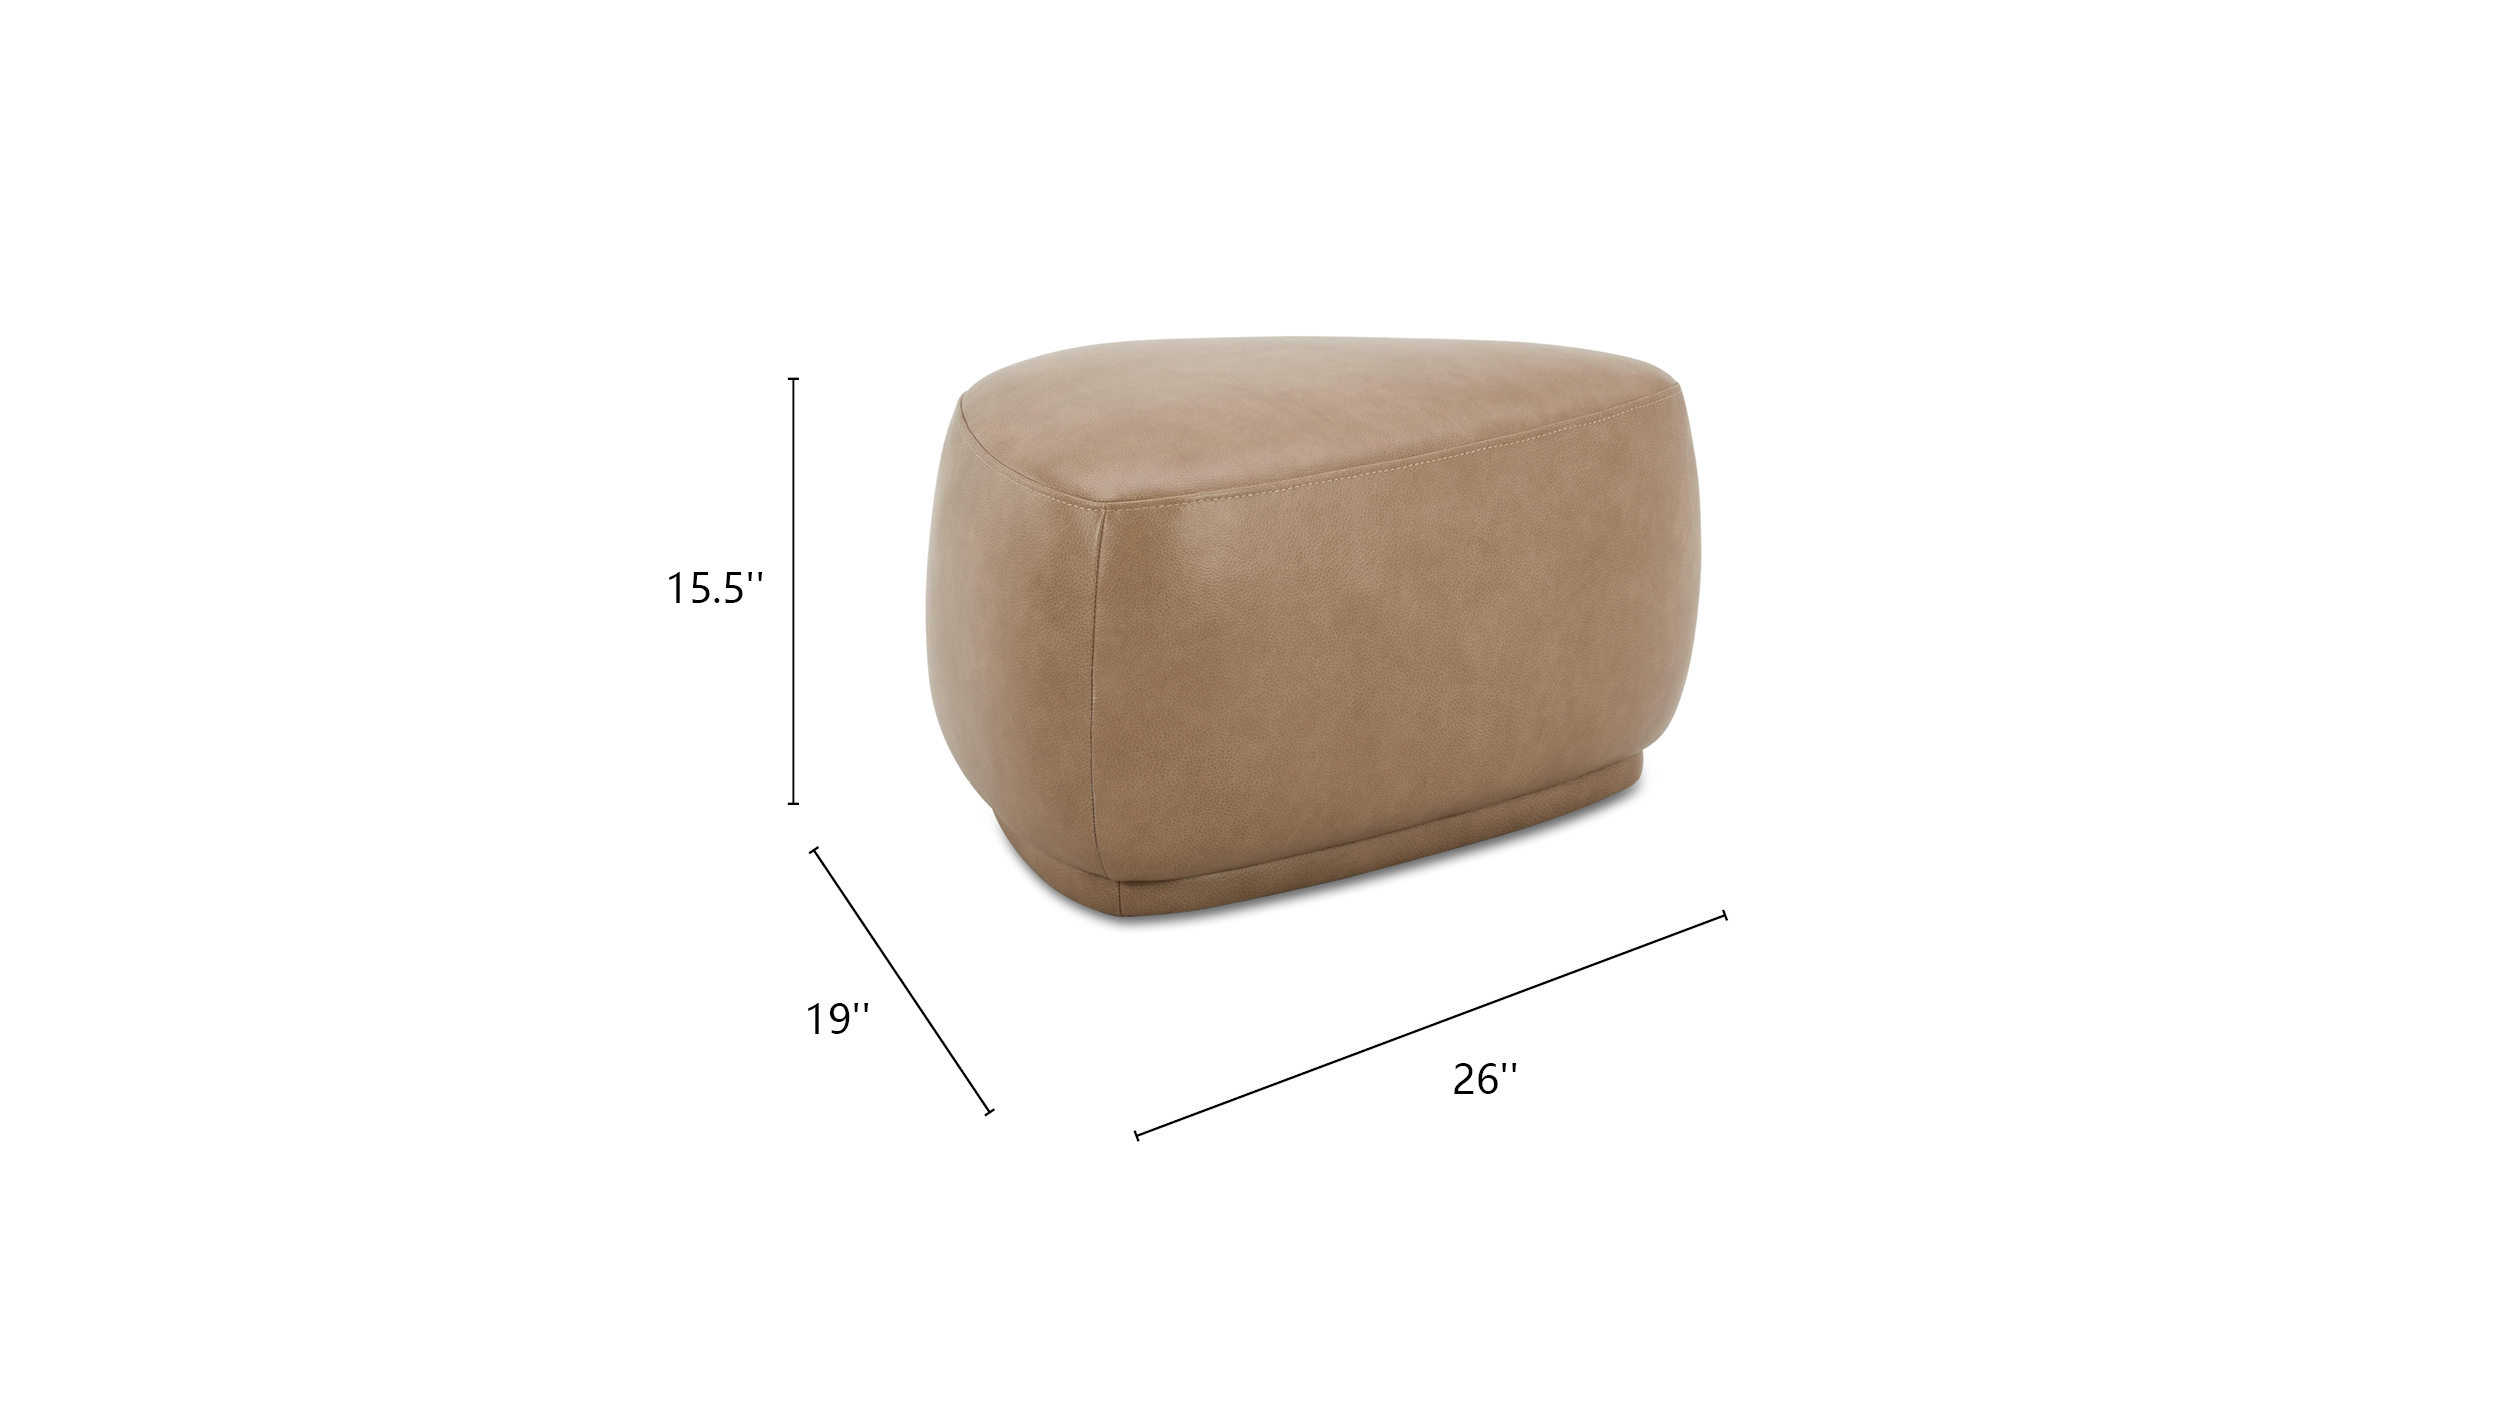 PPebble Rounded Triangle Cocktail Ottoman, Tuscan Tan Brown